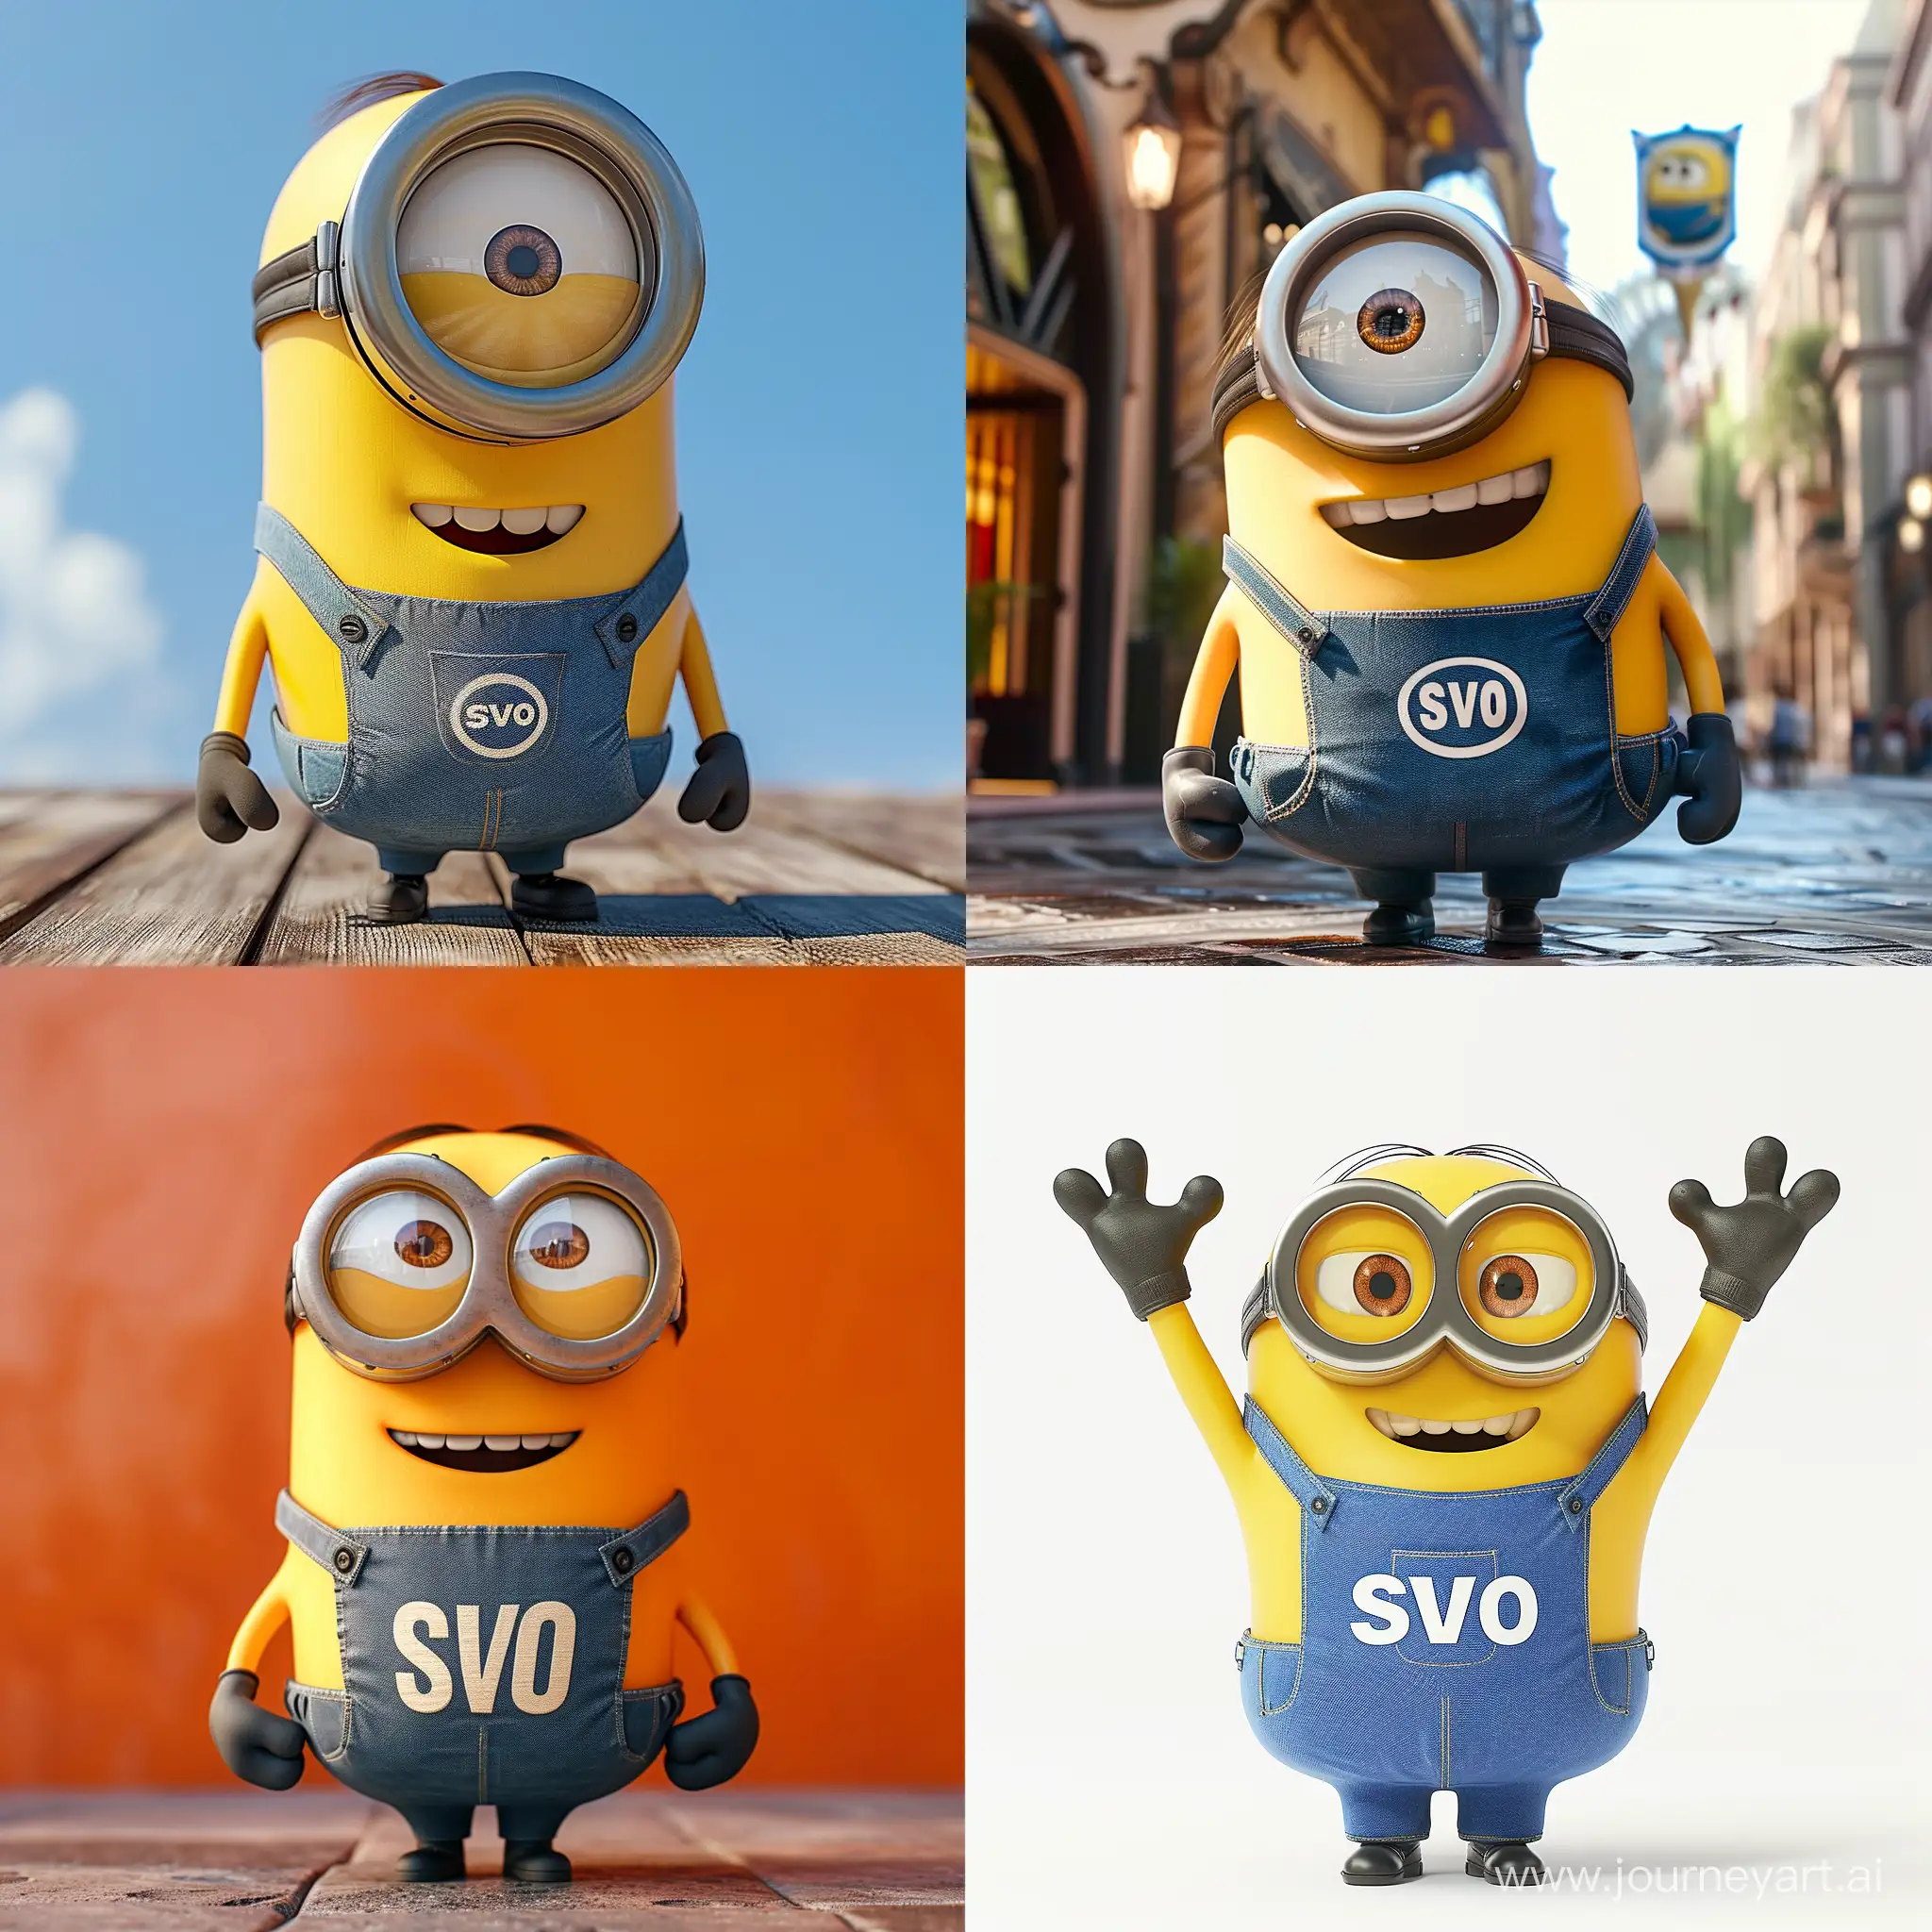 Cheerful-Minion-Wearing-TShirt-with-SVO-Text